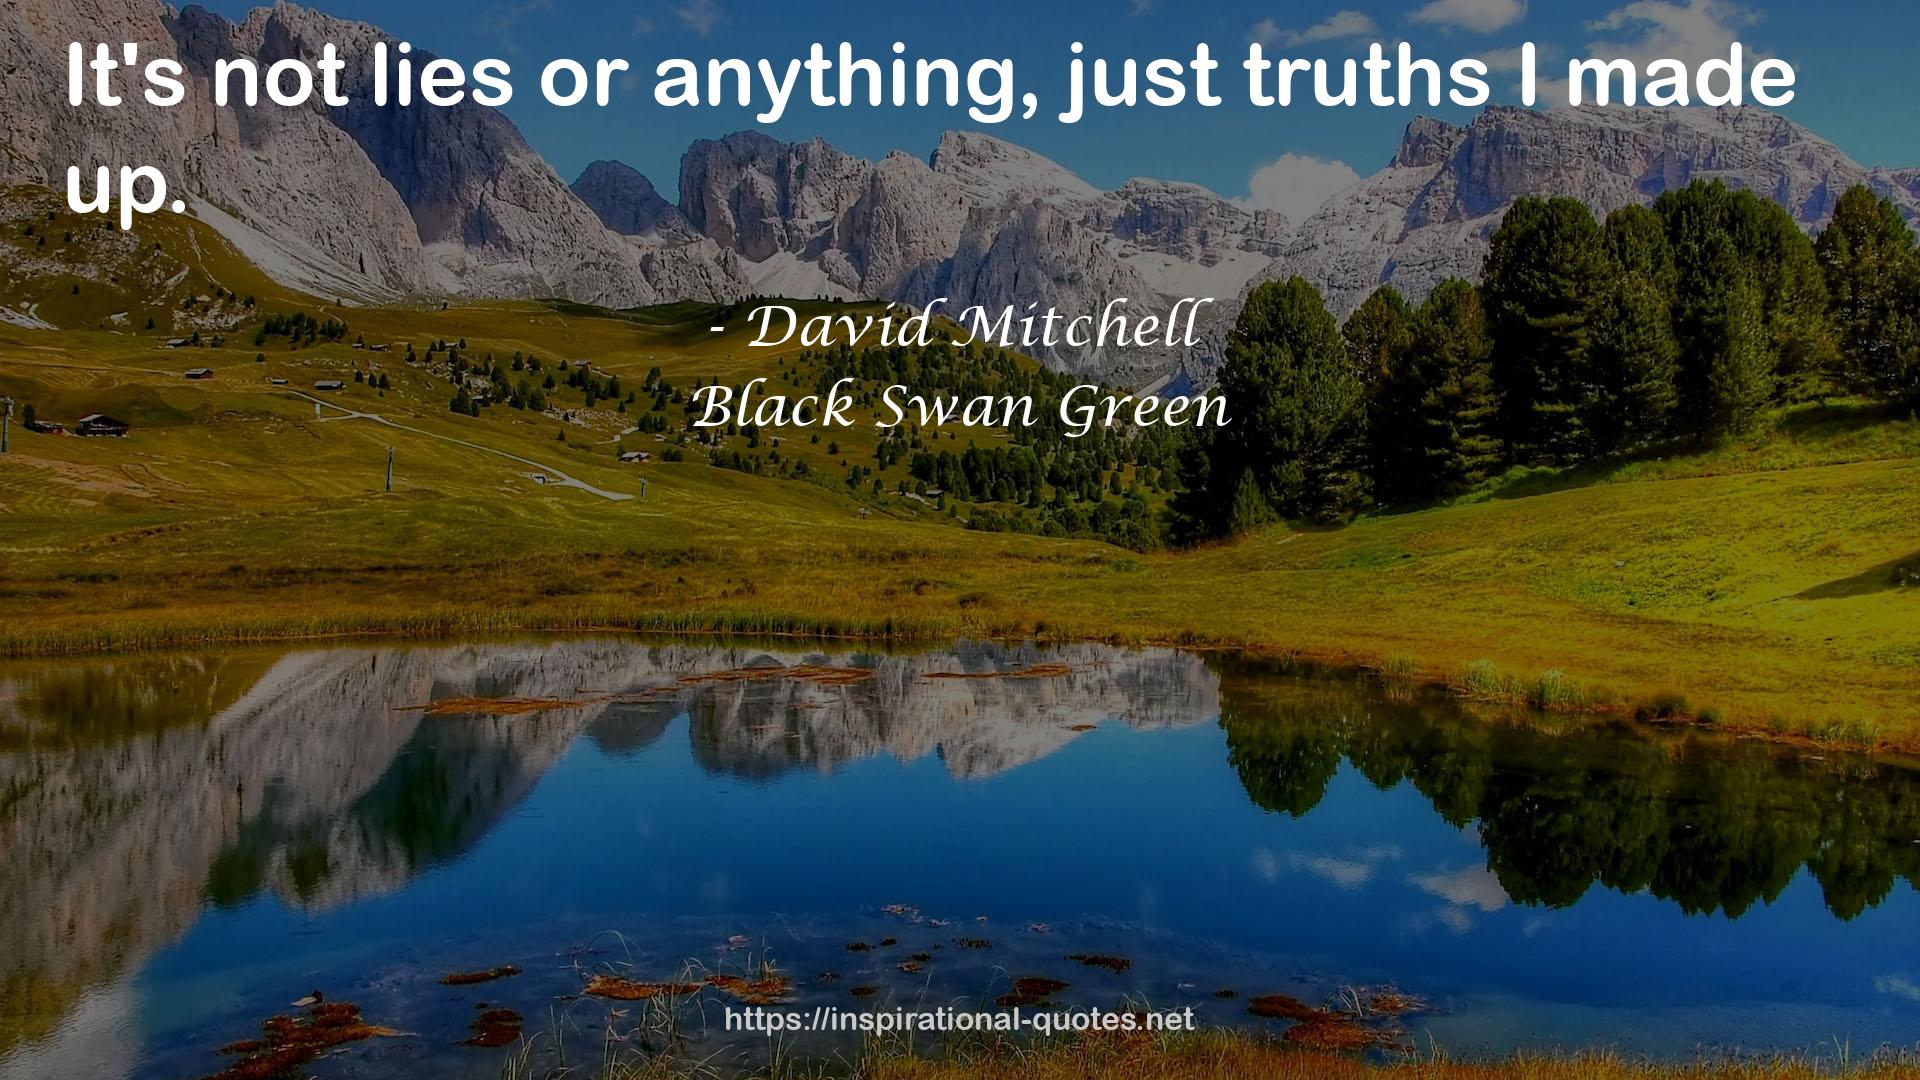 Black Swan Green QUOTES